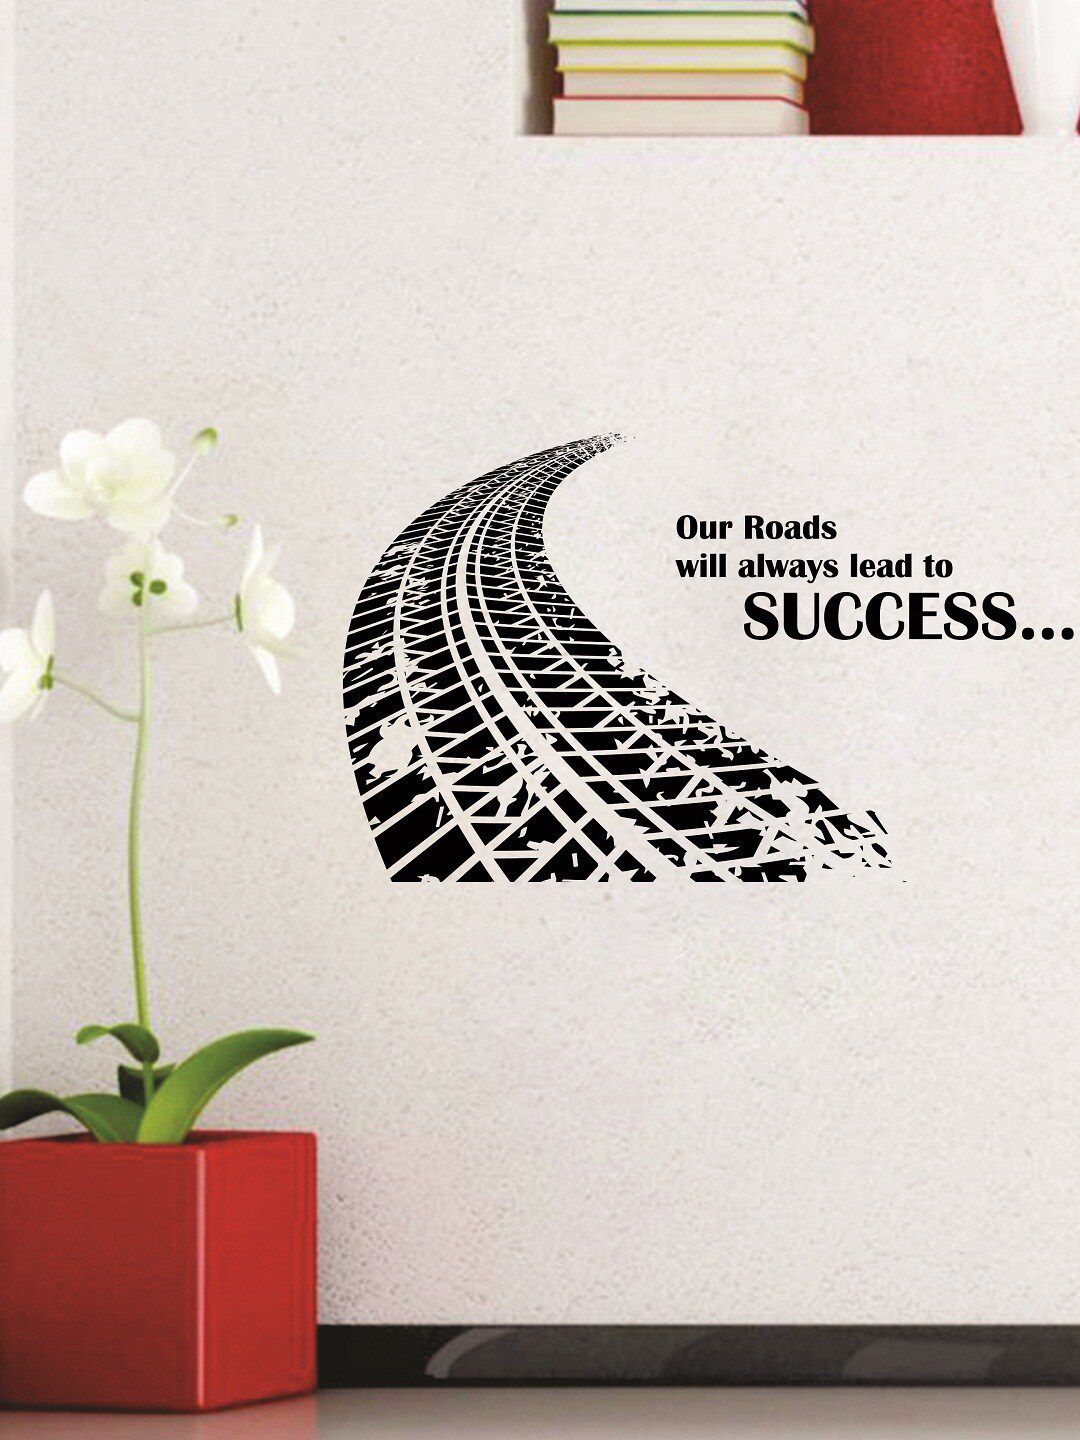 WALLSTICK Black Road To Success Large Vinyl Wall Sticker Price in India